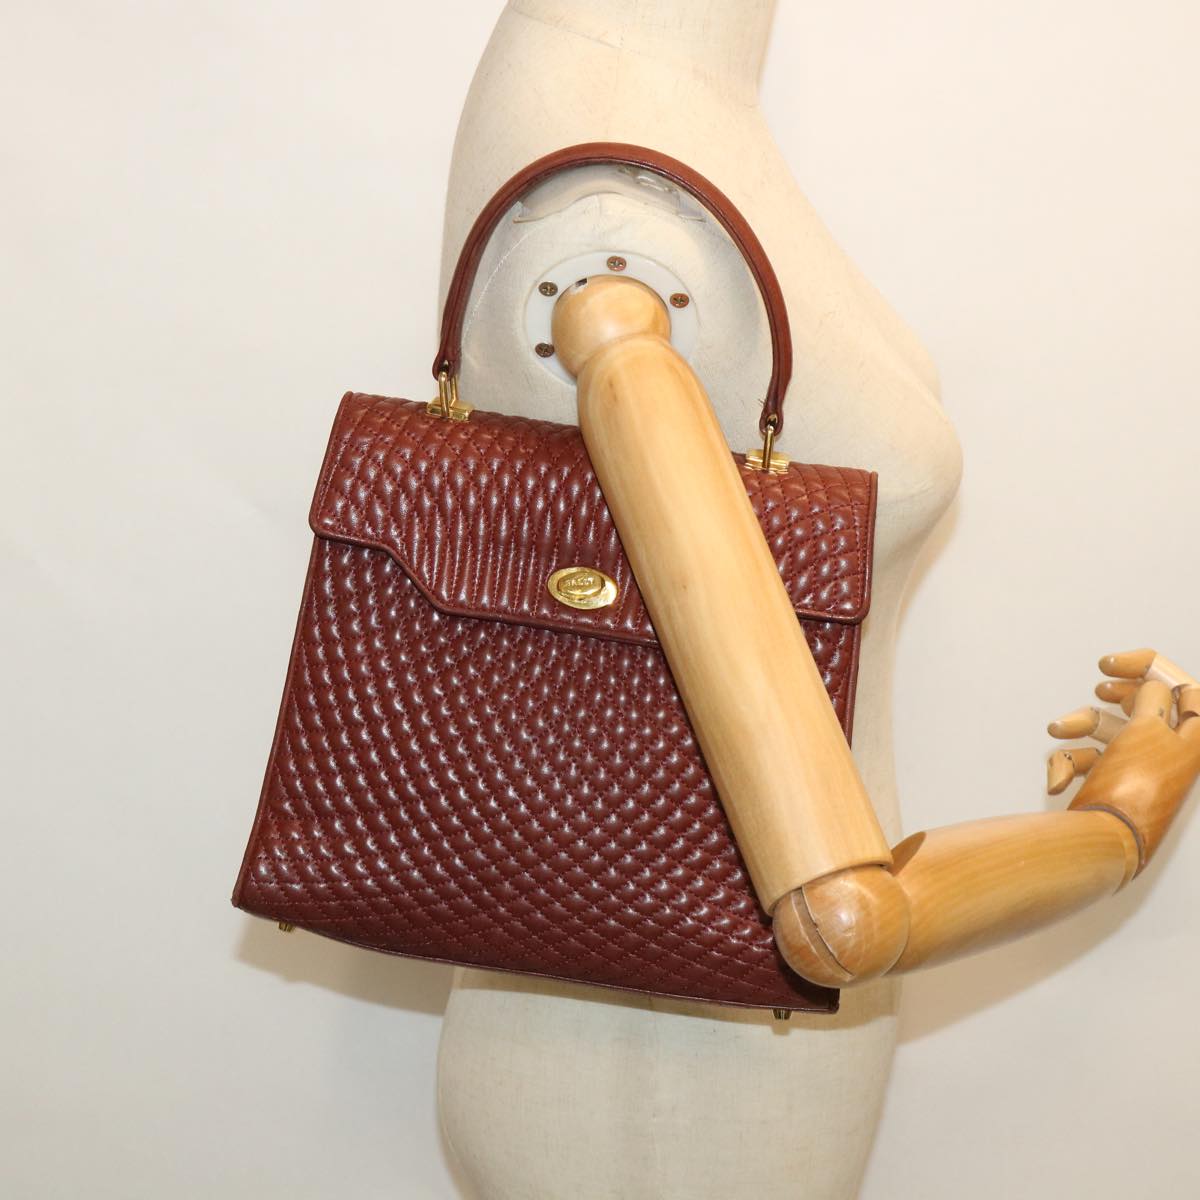 BALLY Quilted Hand Bag Leather Brown Auth 54904